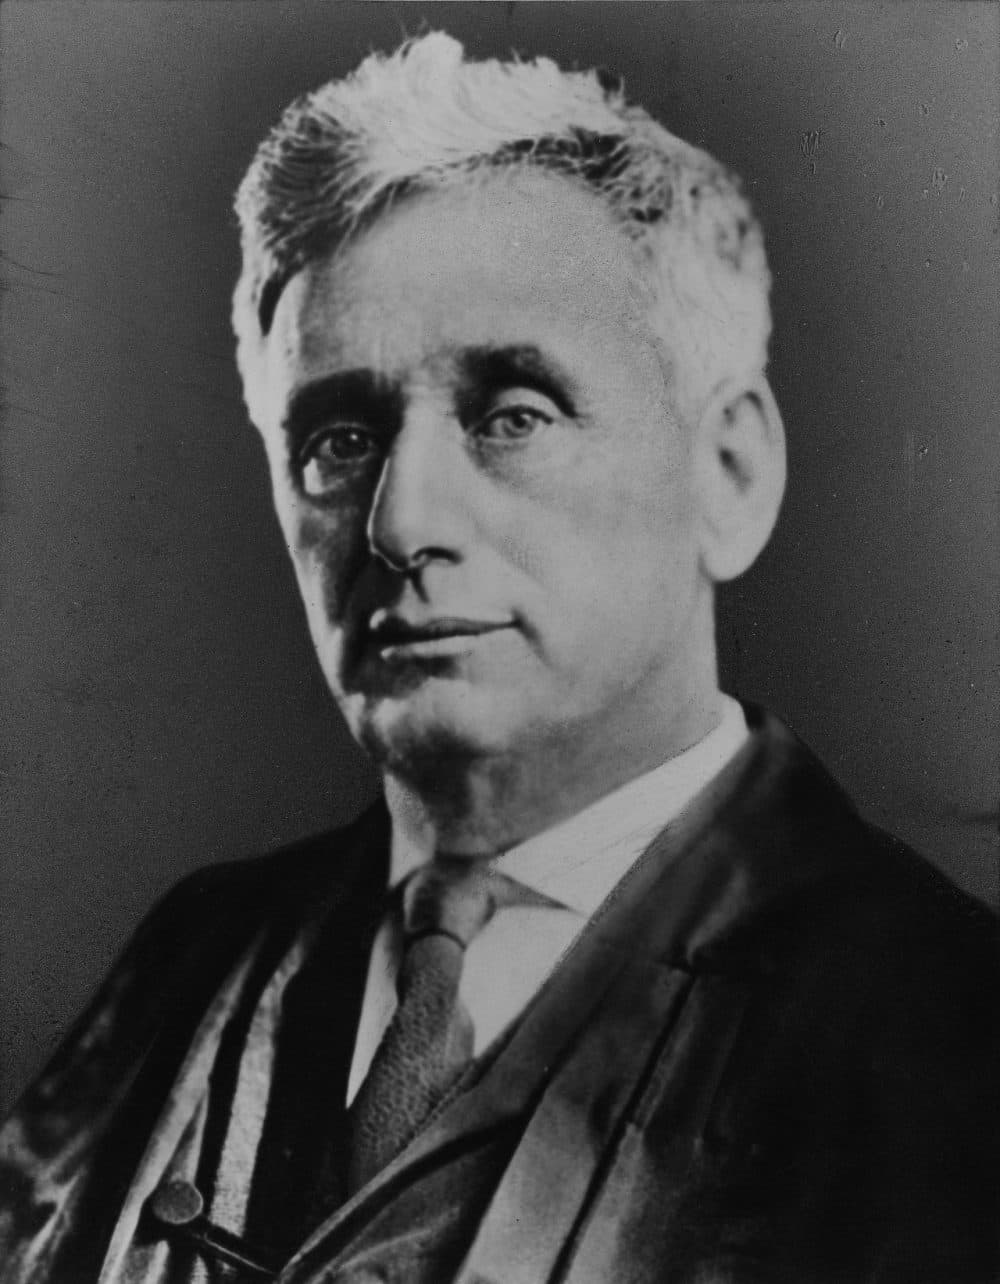 Portrait of American lawyer and Supreme Court Justice Louis Brandeis (1856 - 1941), early 20th Century. (Hulton Archive/Getty Images)